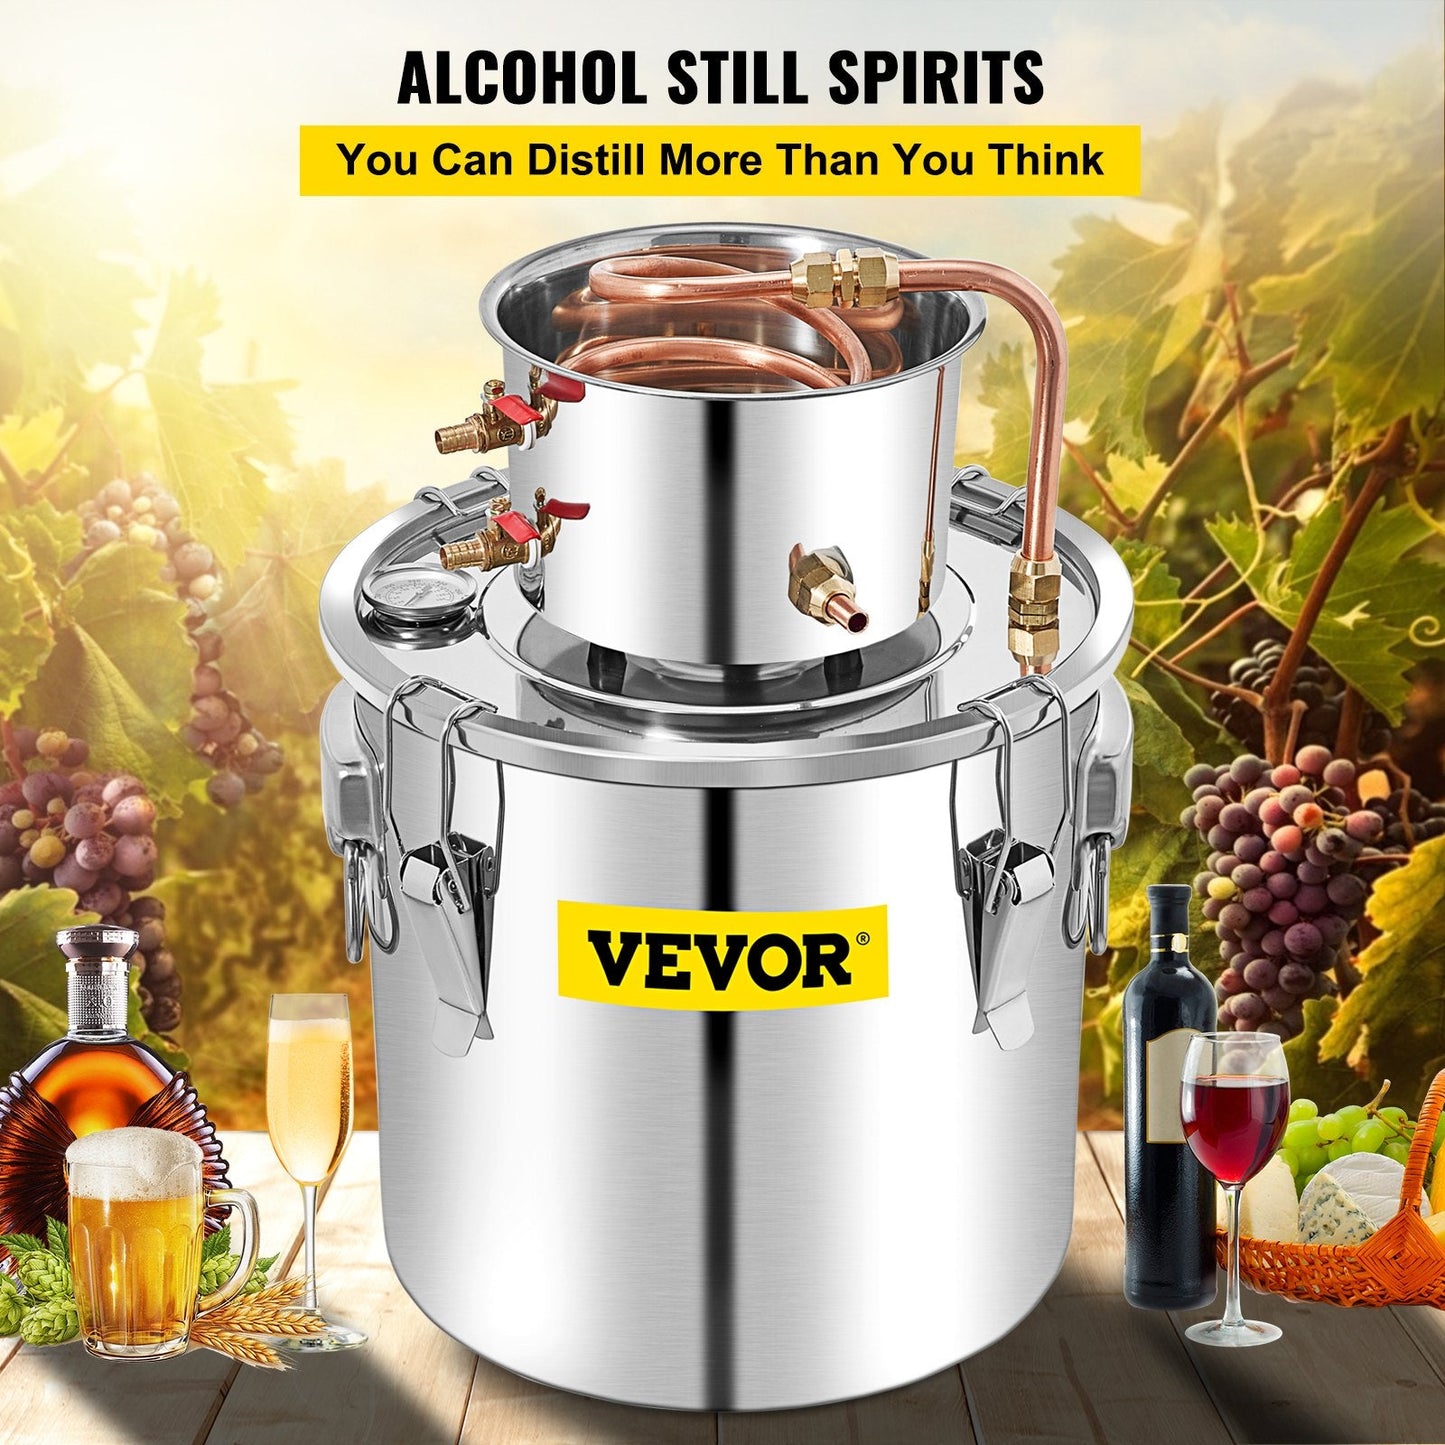 VEVOR Alcohol Still, 50L Distillery Kit w/Condenser & Pump, 13.2Gal Alcohol Still w/Copper Tube, Whiskey Distilling Kit w/Build-in Thermometer, Whiskey Making Kit for DIY Alcohol, Stainless Steel-0